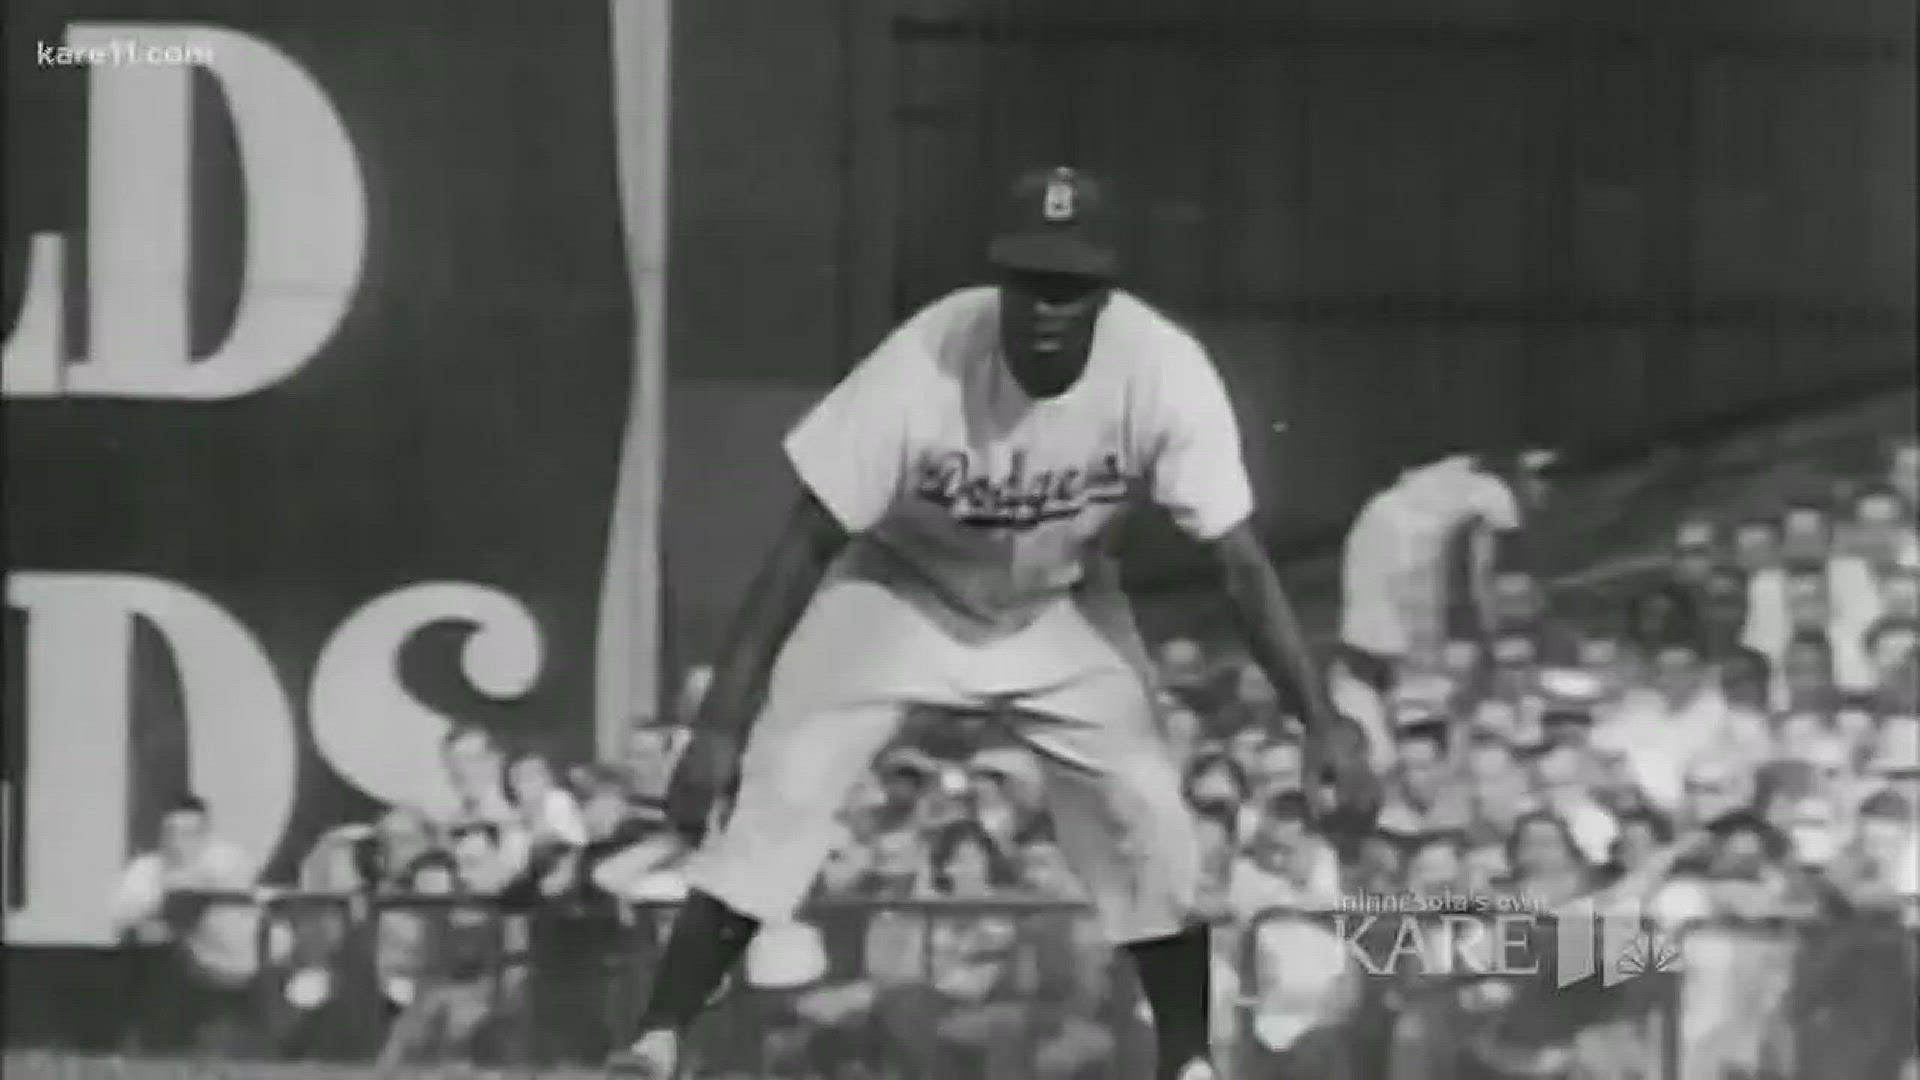 MVP, The Jackie Robinson Story' comes to life in new play